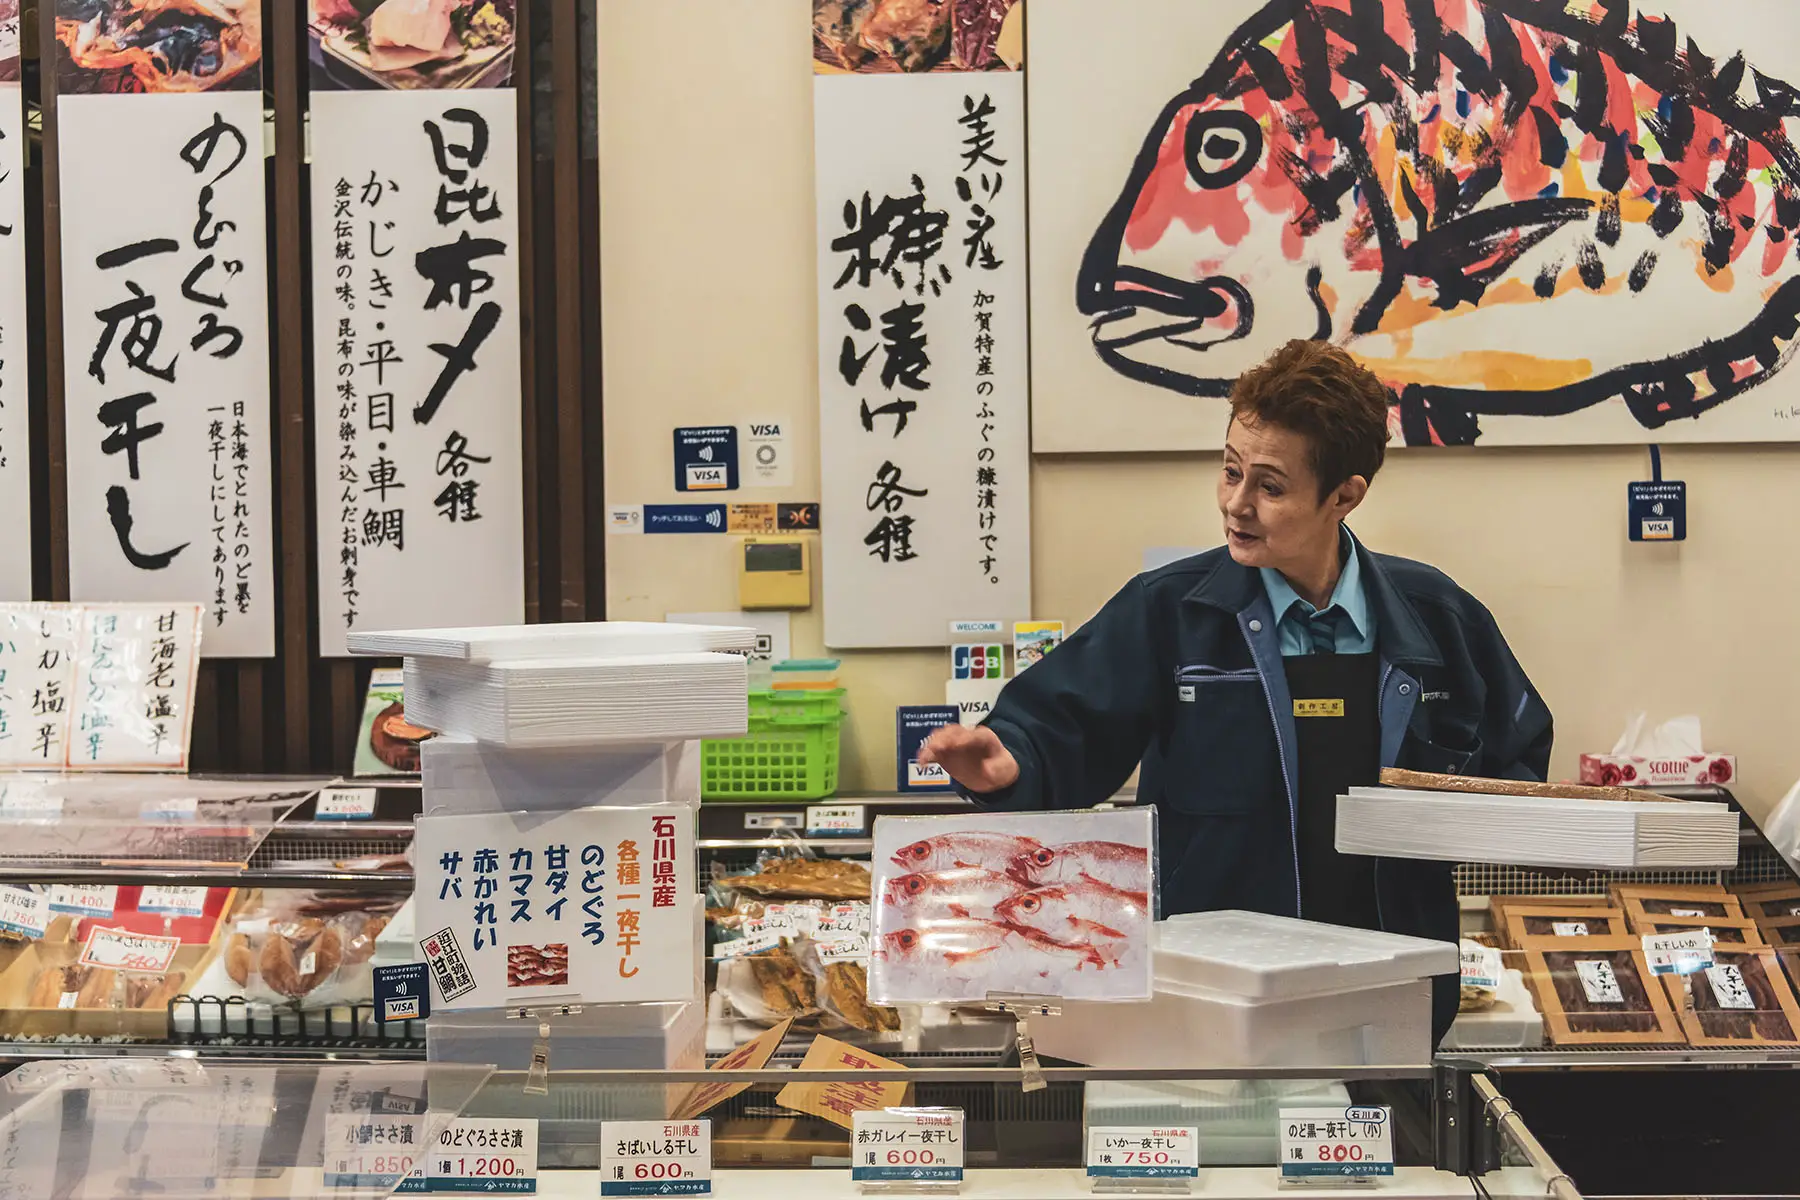 Fish lady standing by her stand at Omicho Market in Kanazawa, Japan.